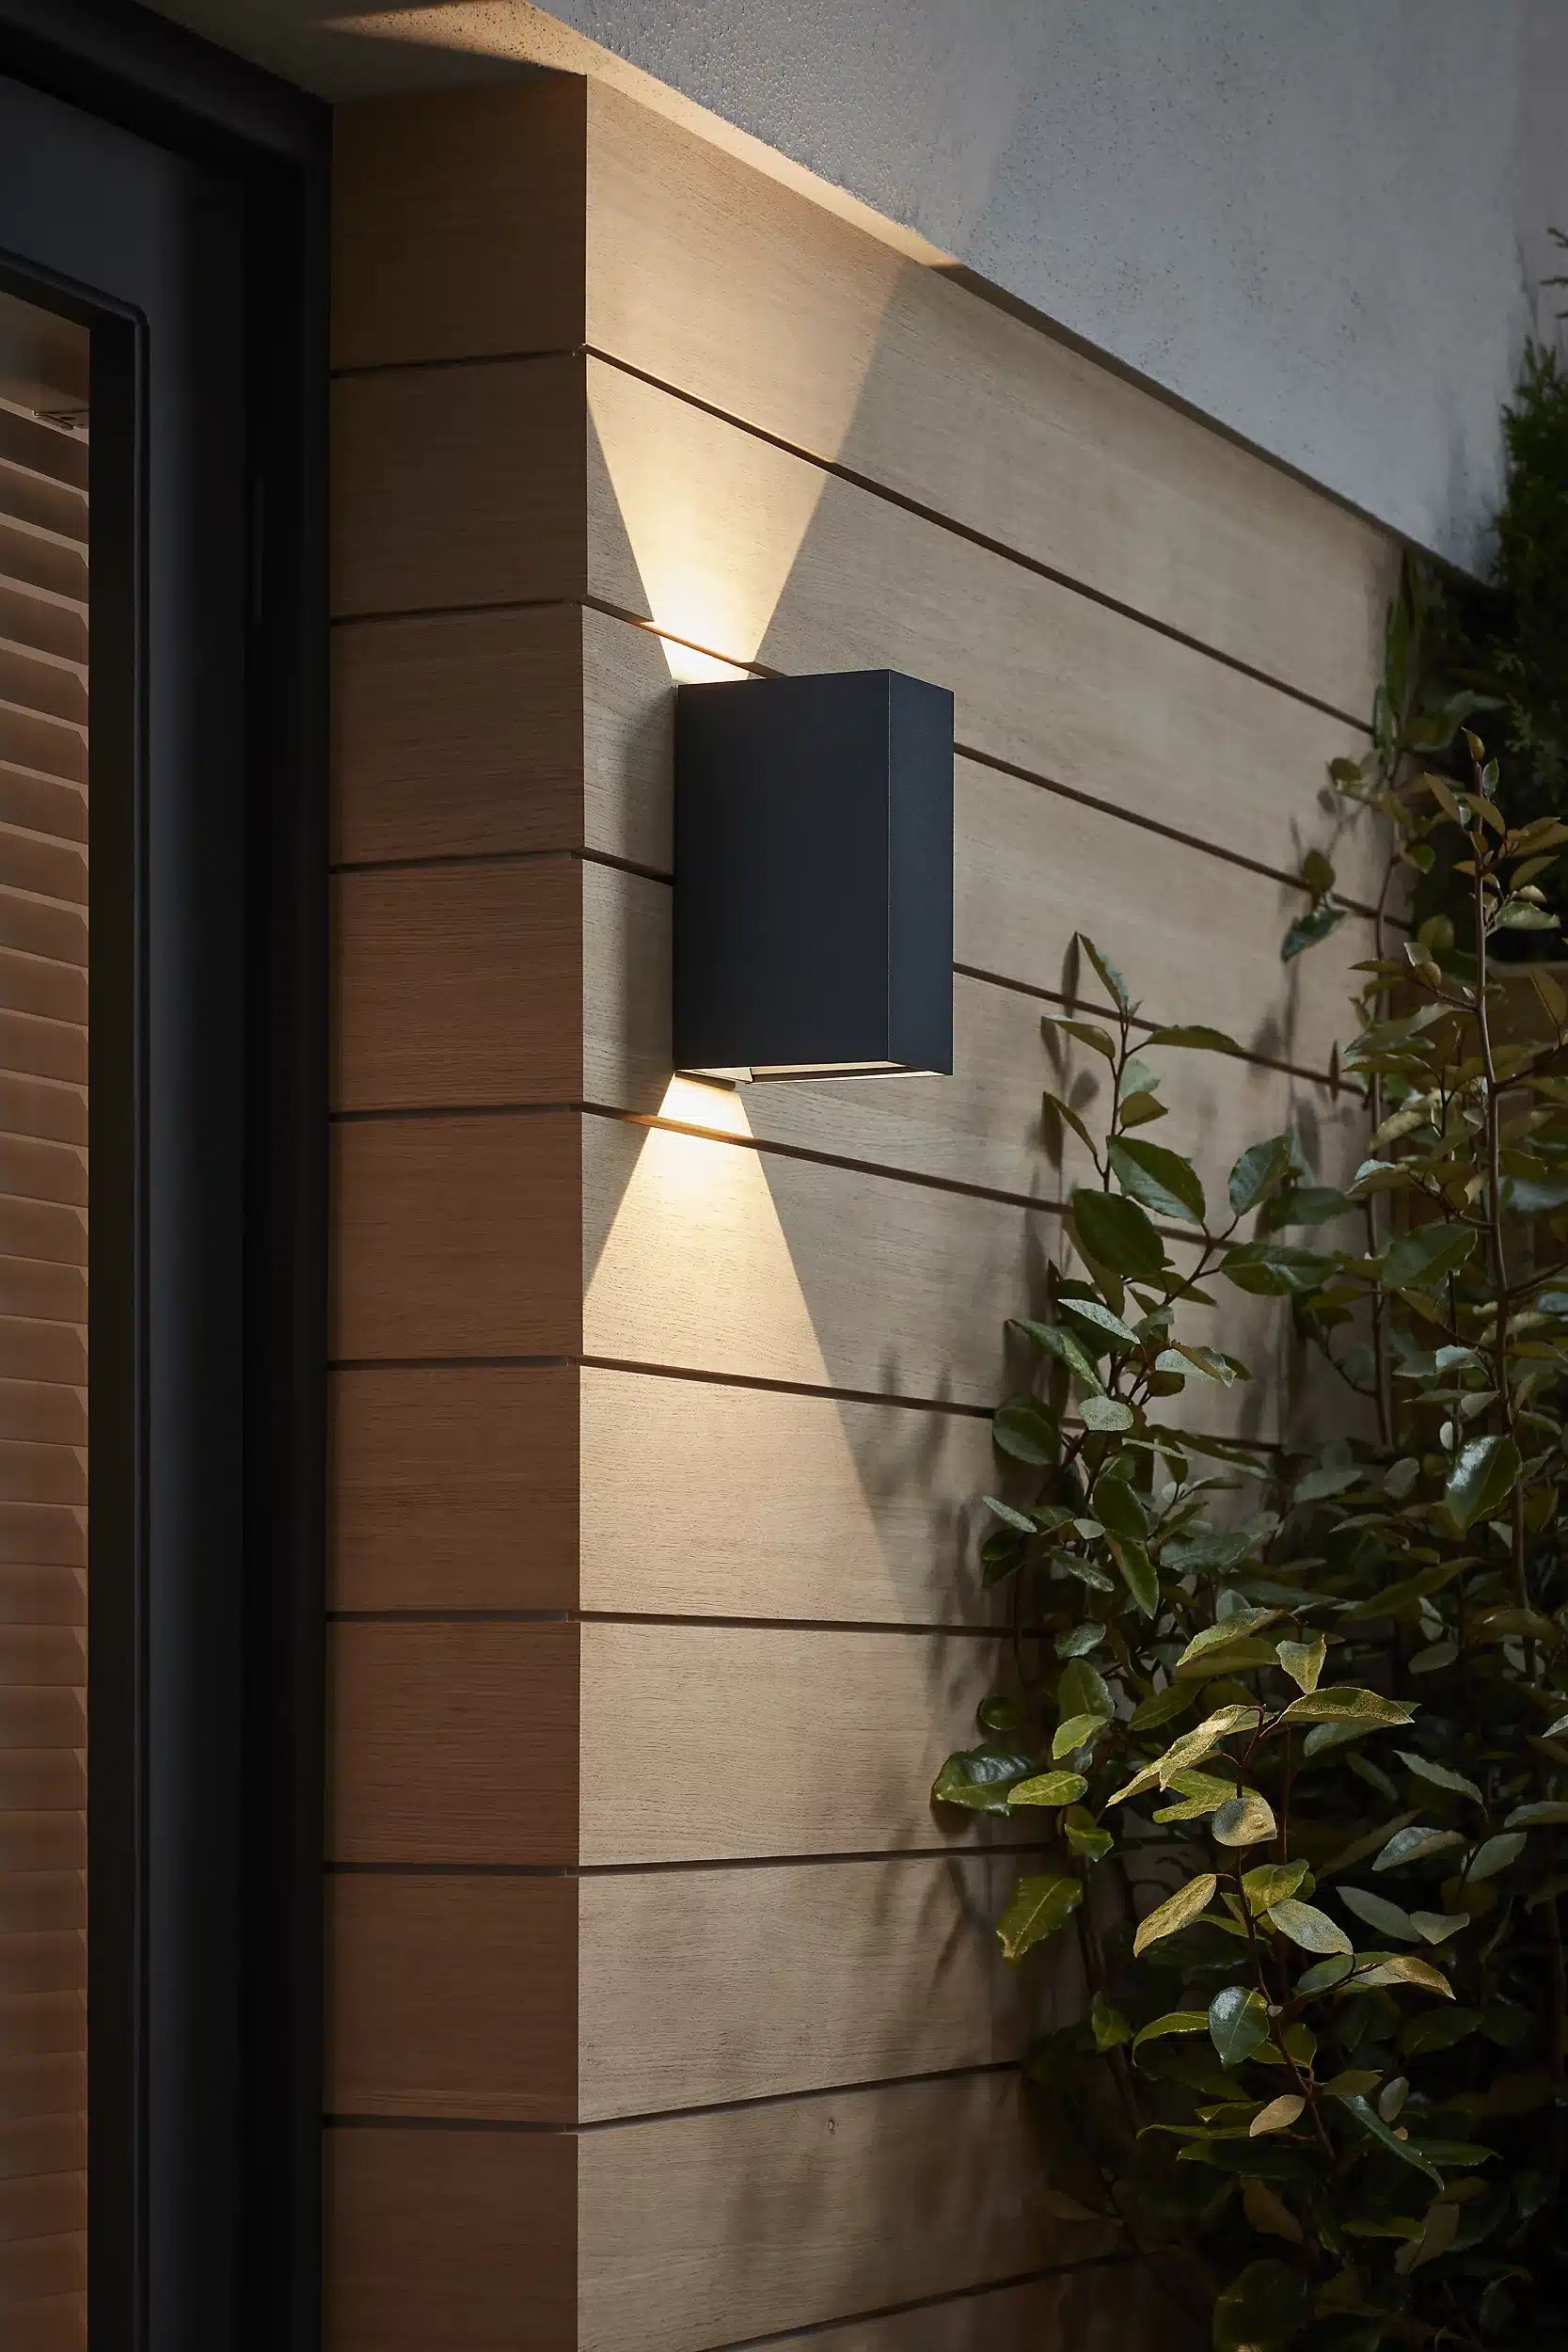 Blooma Edna Matt Charcoal grey Mains-powered LED Outdoor Wall light 712lm 4032